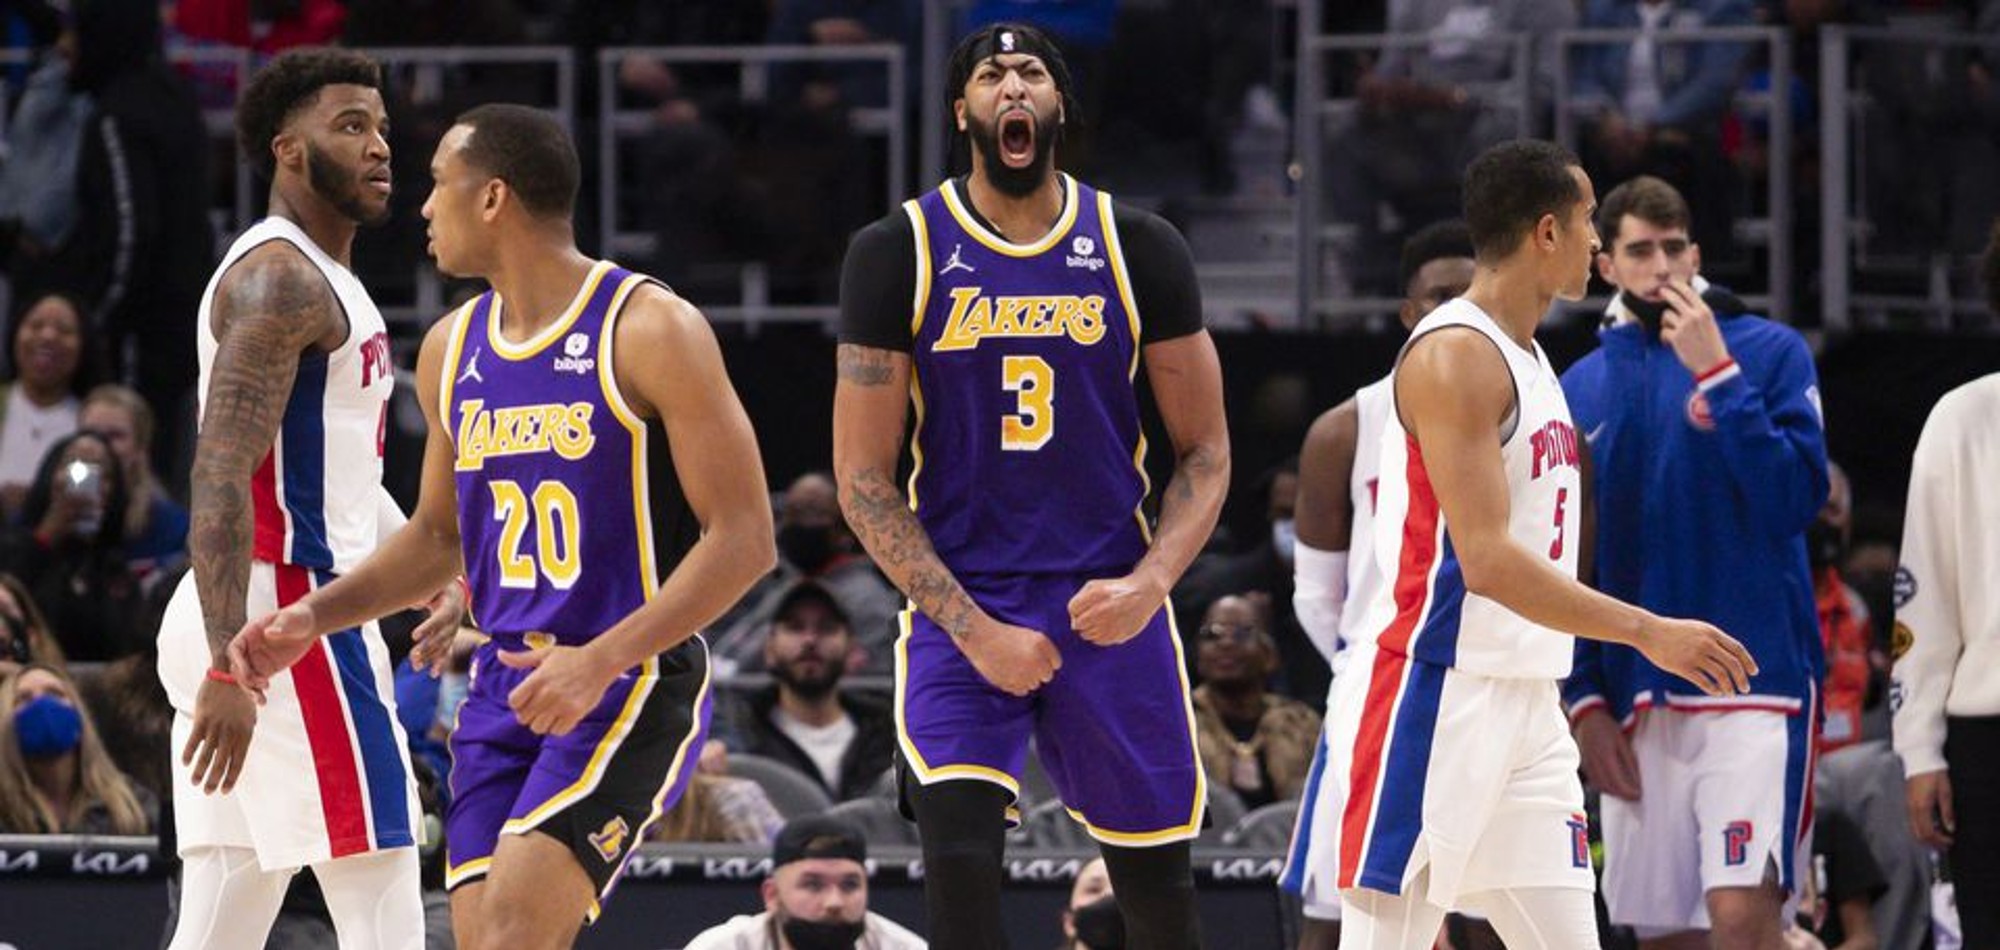 NBA roundup: Lakers rally past Pistons after LeBron James ejected